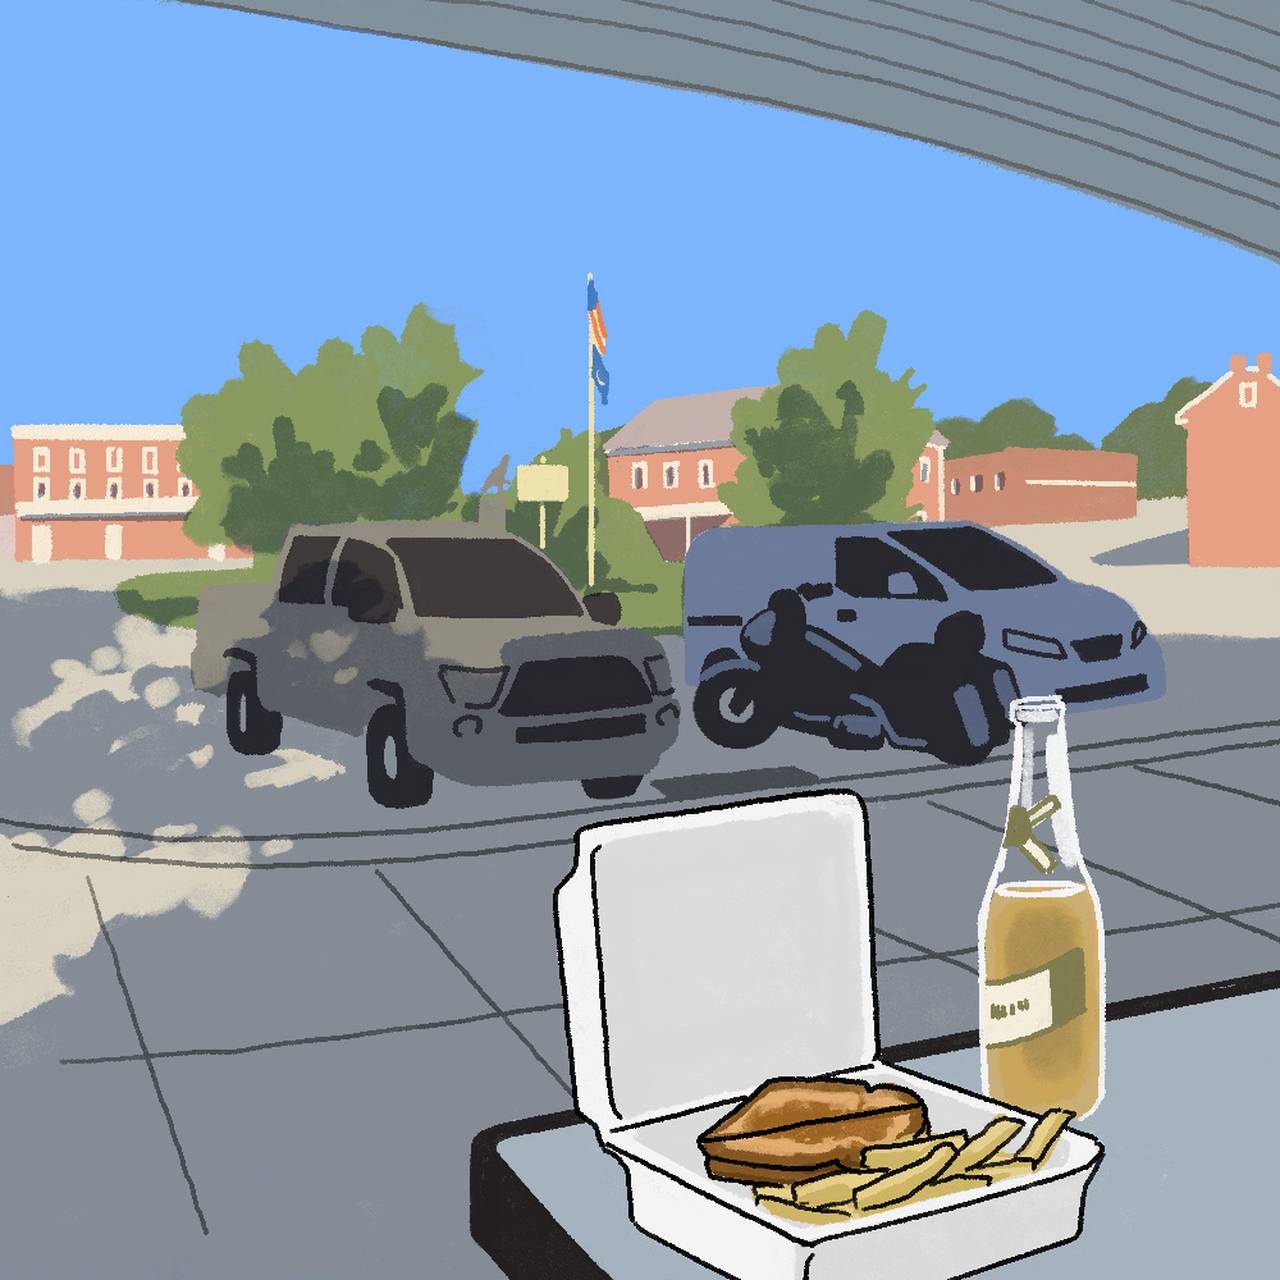 Illustration of grilled cheese sandwich and fries in a take out container next to a beer on a table in the foreground. In the background are parked cars and a motorcycle next to the sidewalk, with a grassy circle and red brick buildings in the background.